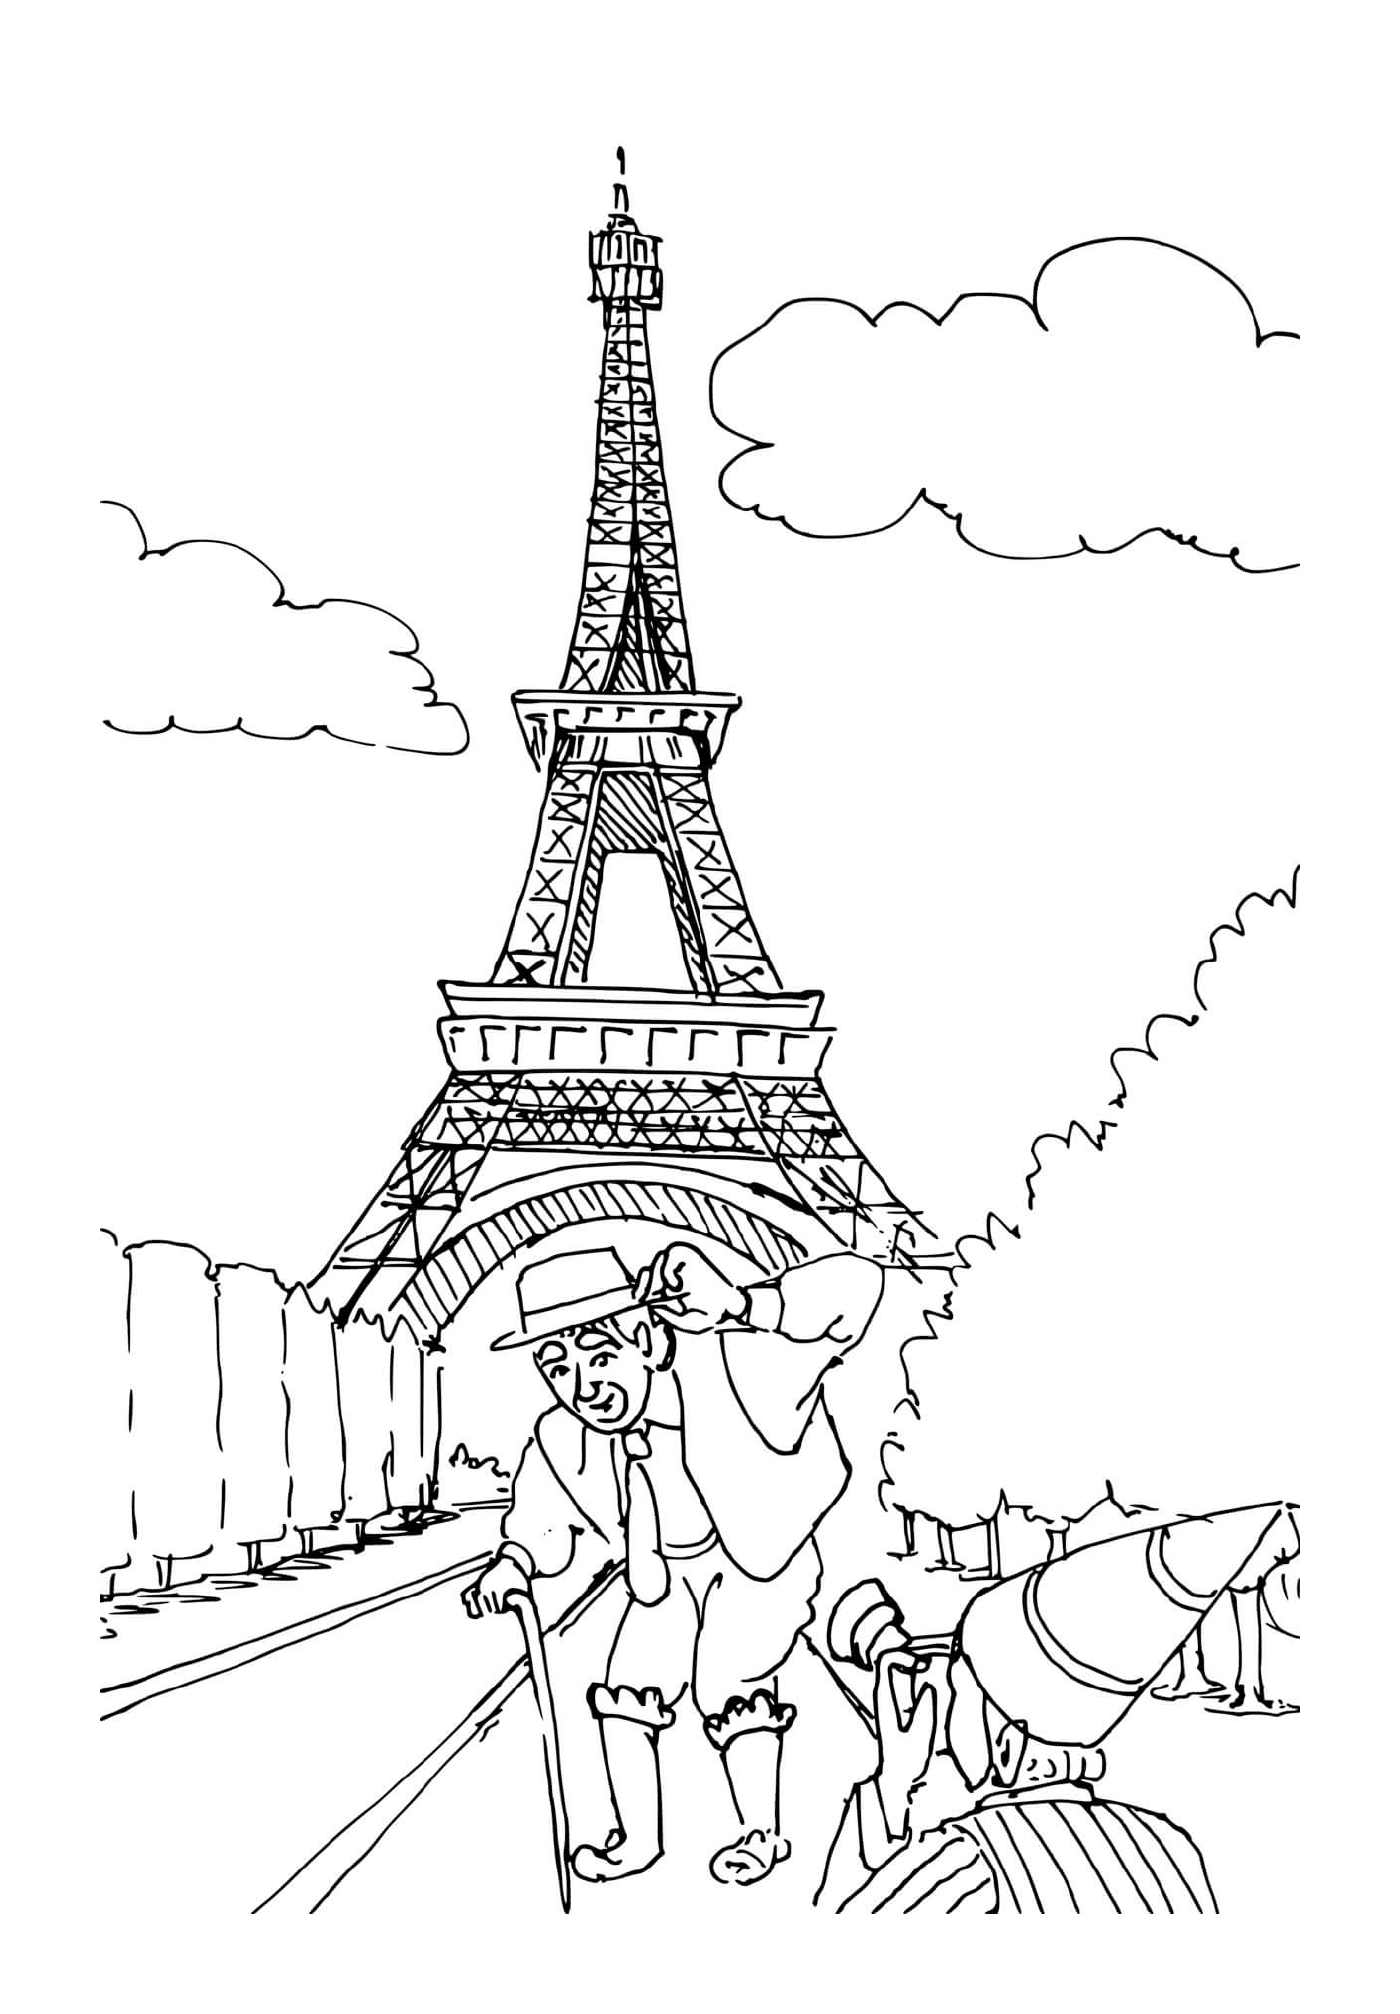  Tourist in front of the Eiffel Tower 